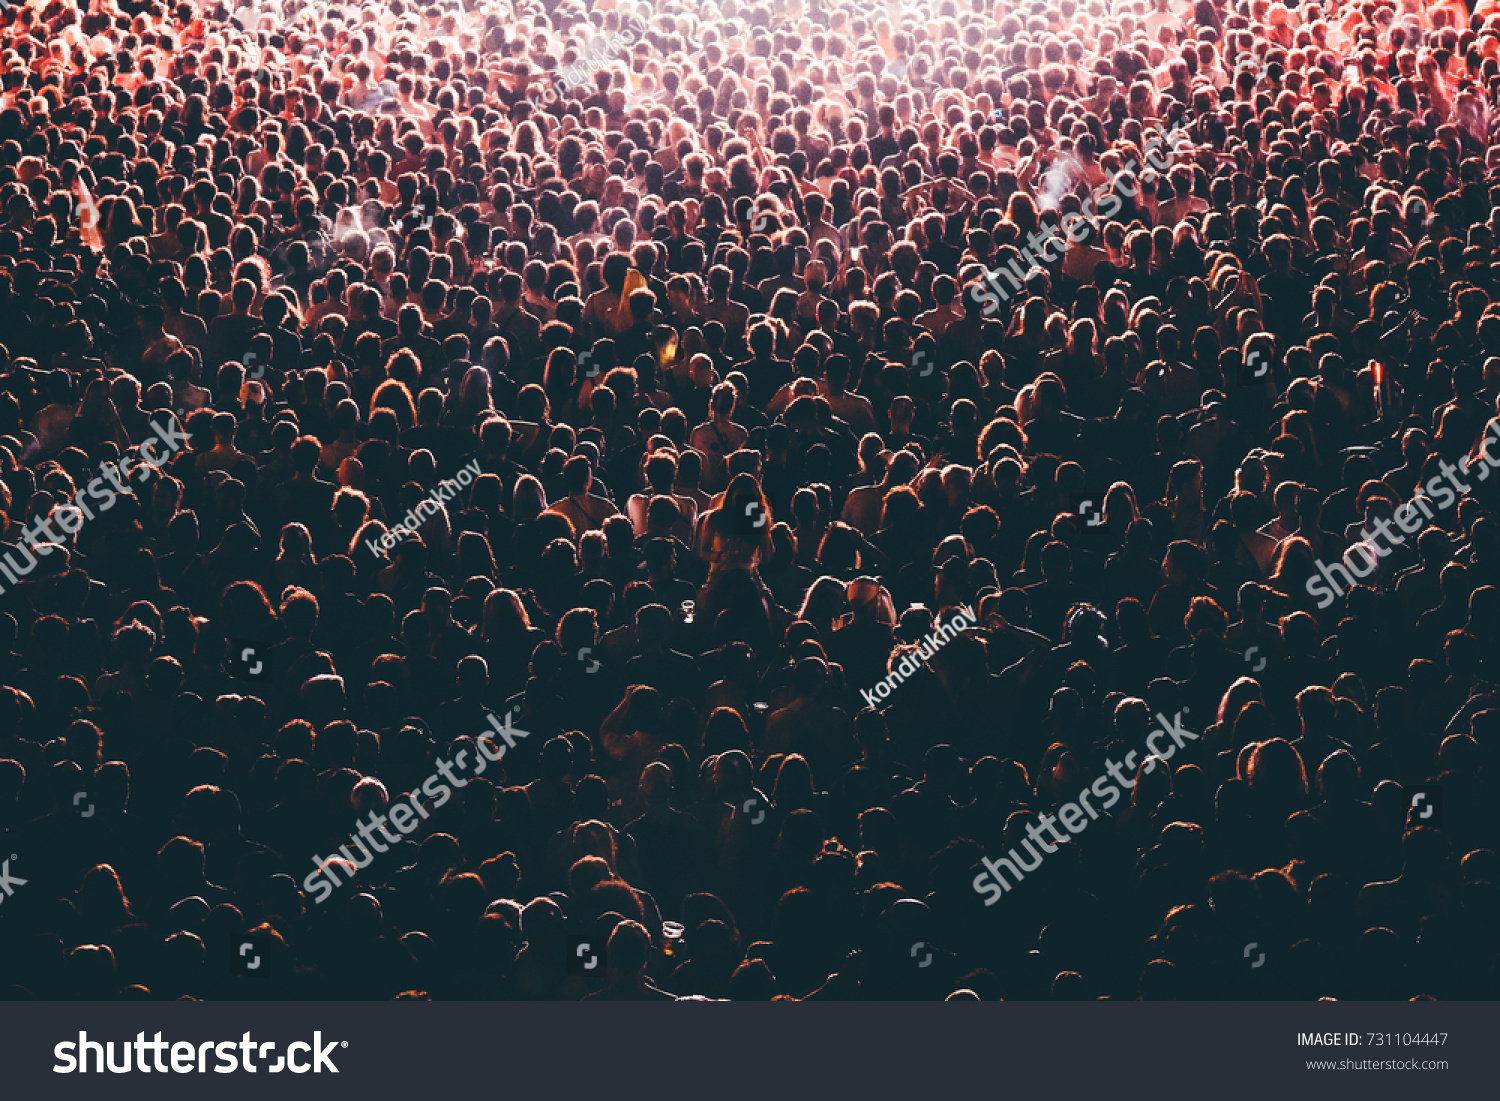 Colorful crowd of people of a big music festival in a stage lights as a beautiful background #731104447